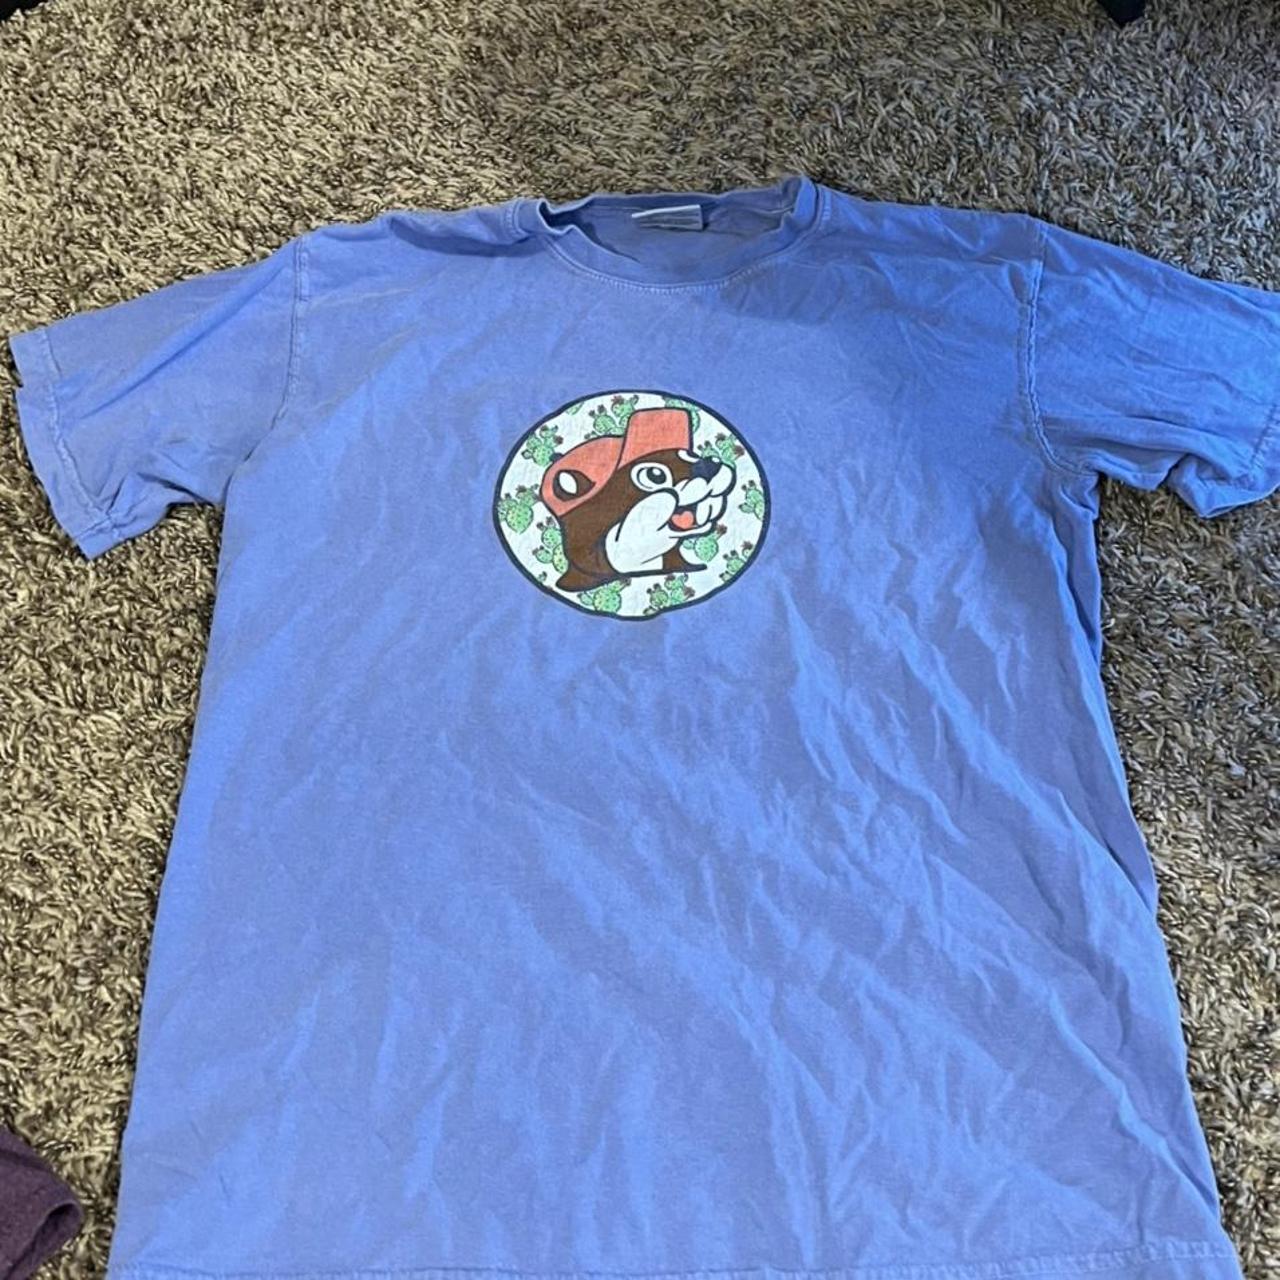 Product Image 1 - buccee shirt size small comfort